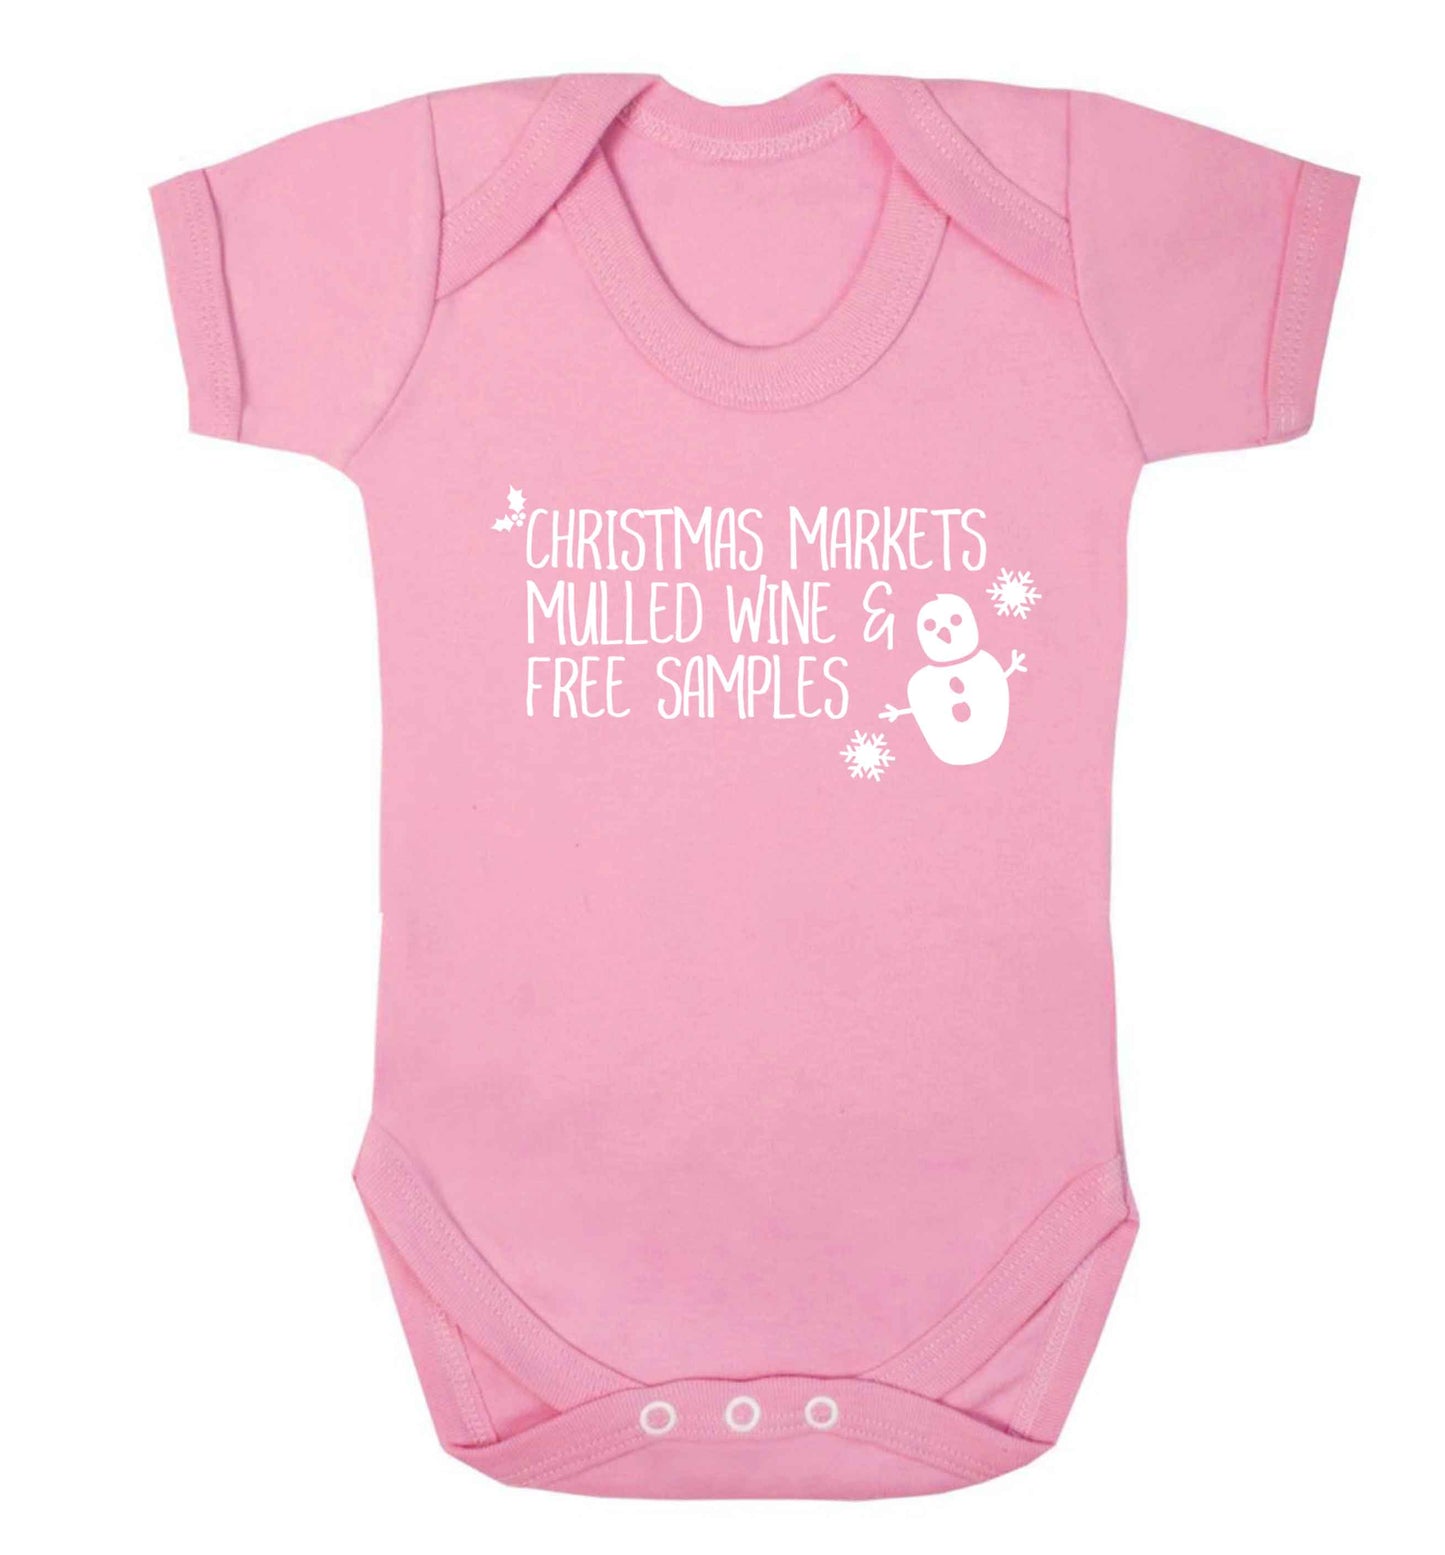 Christmas market mulled wine & free samples Baby Vest pale pink 18-24 months